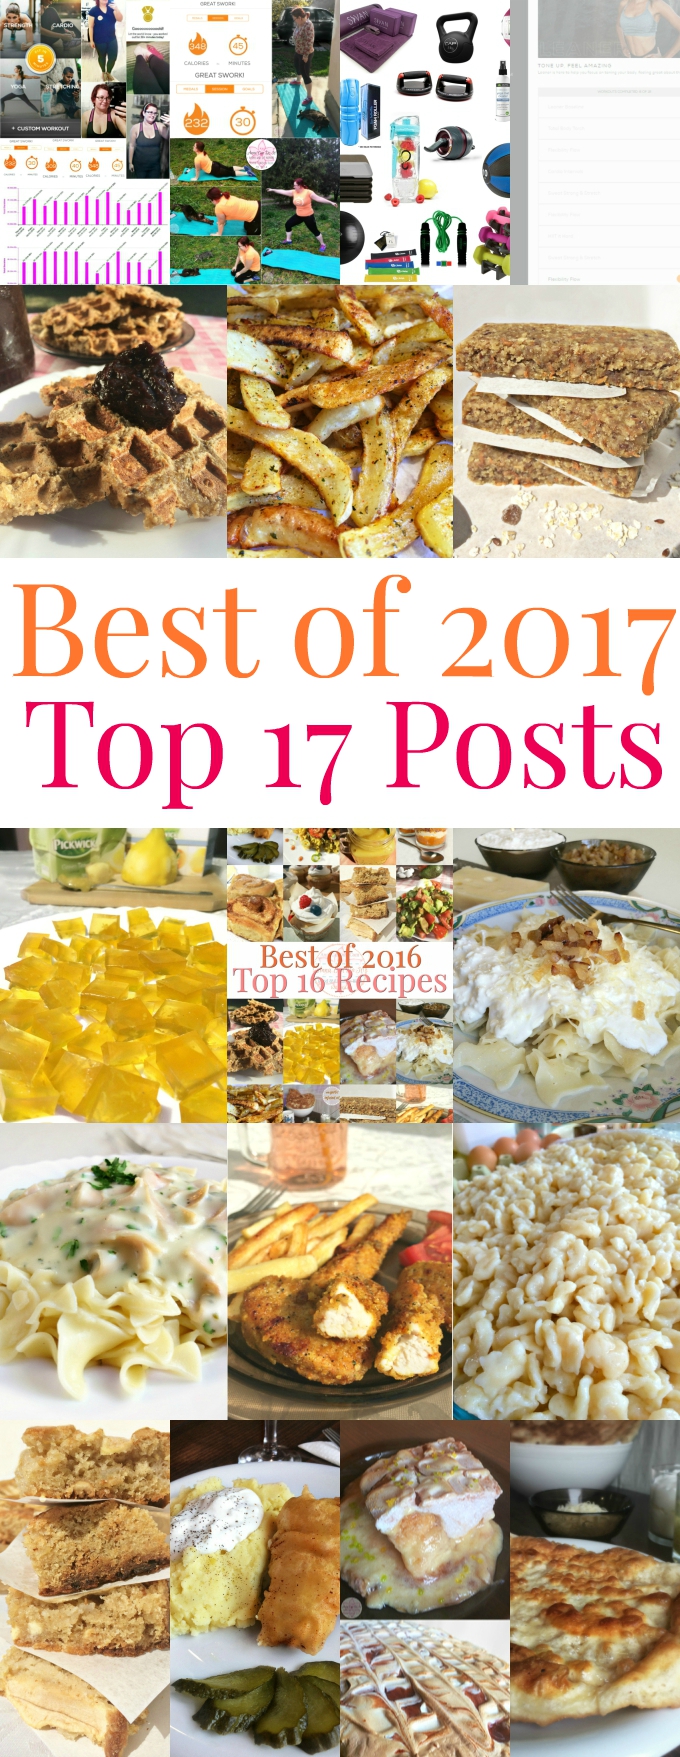 Best of 2017 - Top 17 Posts - Anna Can Do It!